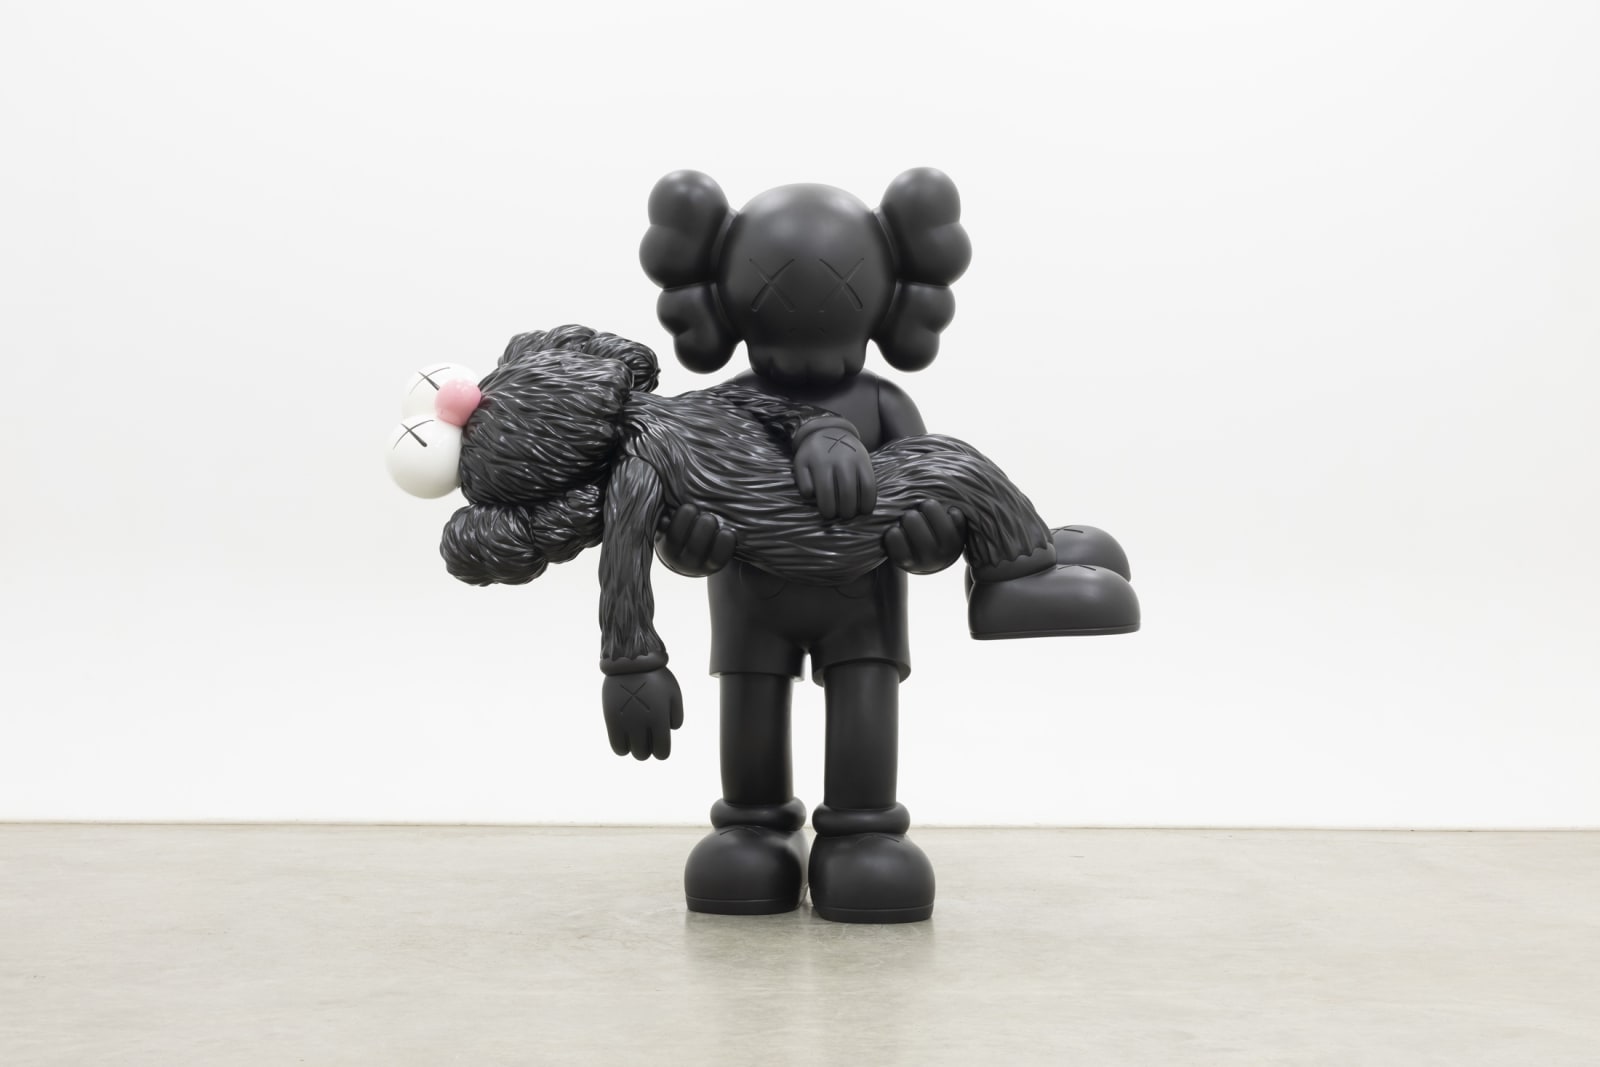 KAWS GONE 2020 bronze, patina, paint 71 x 71 1/2 x 31 1/8 inches 180.3 x 181.6 x 79.1 cm Edition 1 of 1, with 1 AP